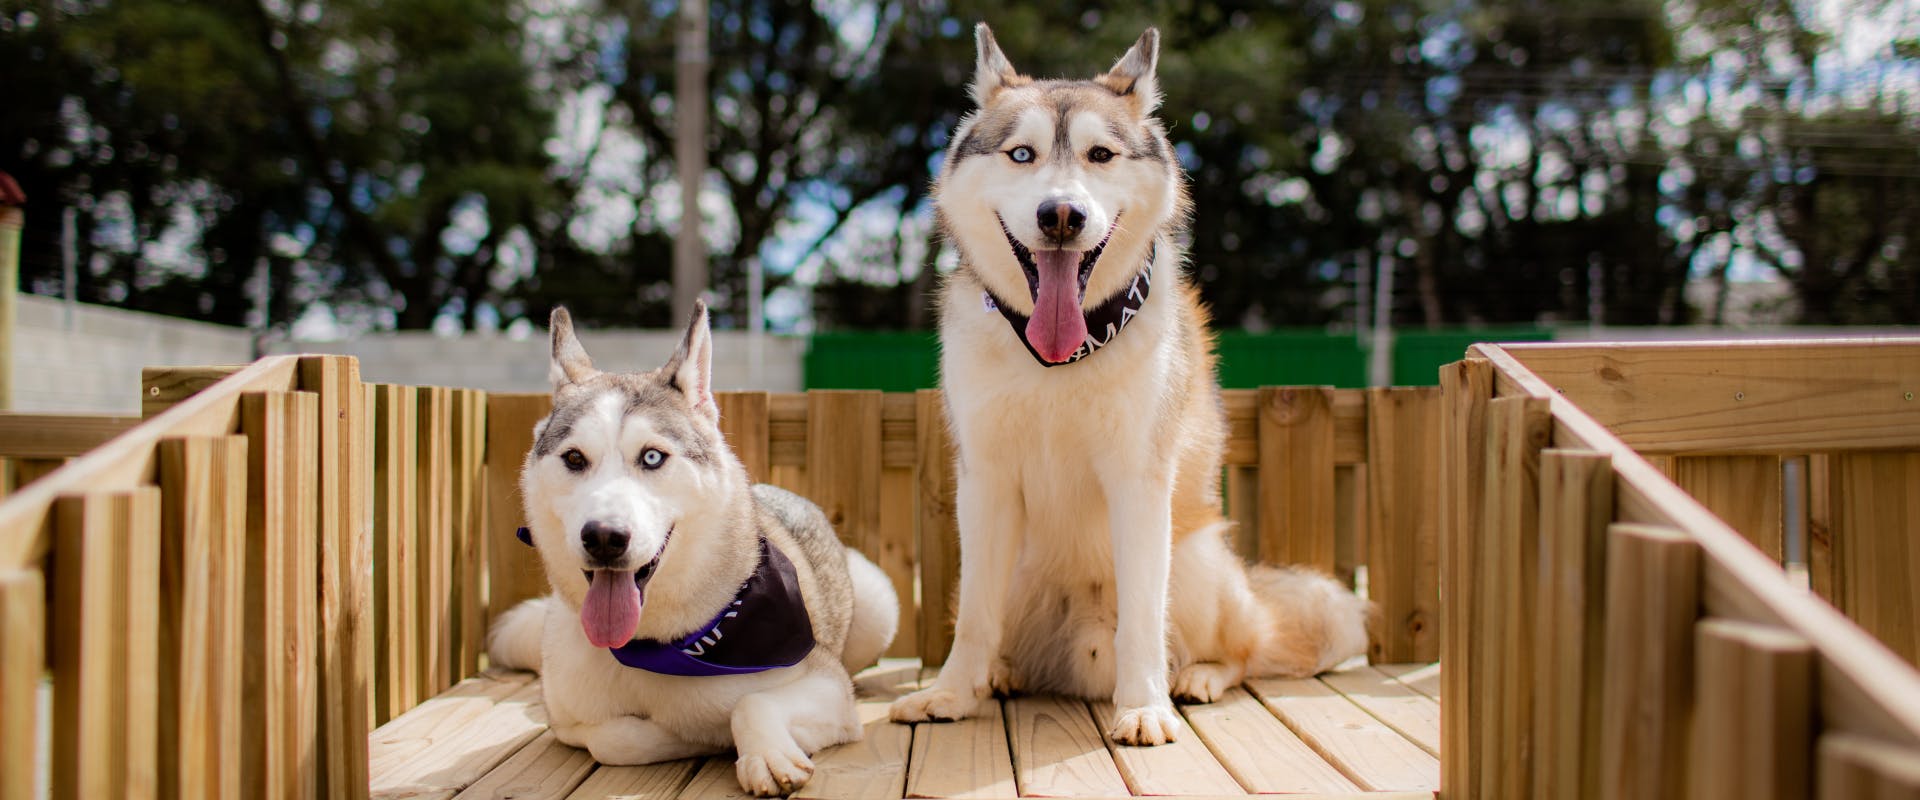 two huskies sitting on a wooden walkway for dogs at a doggy daycare center